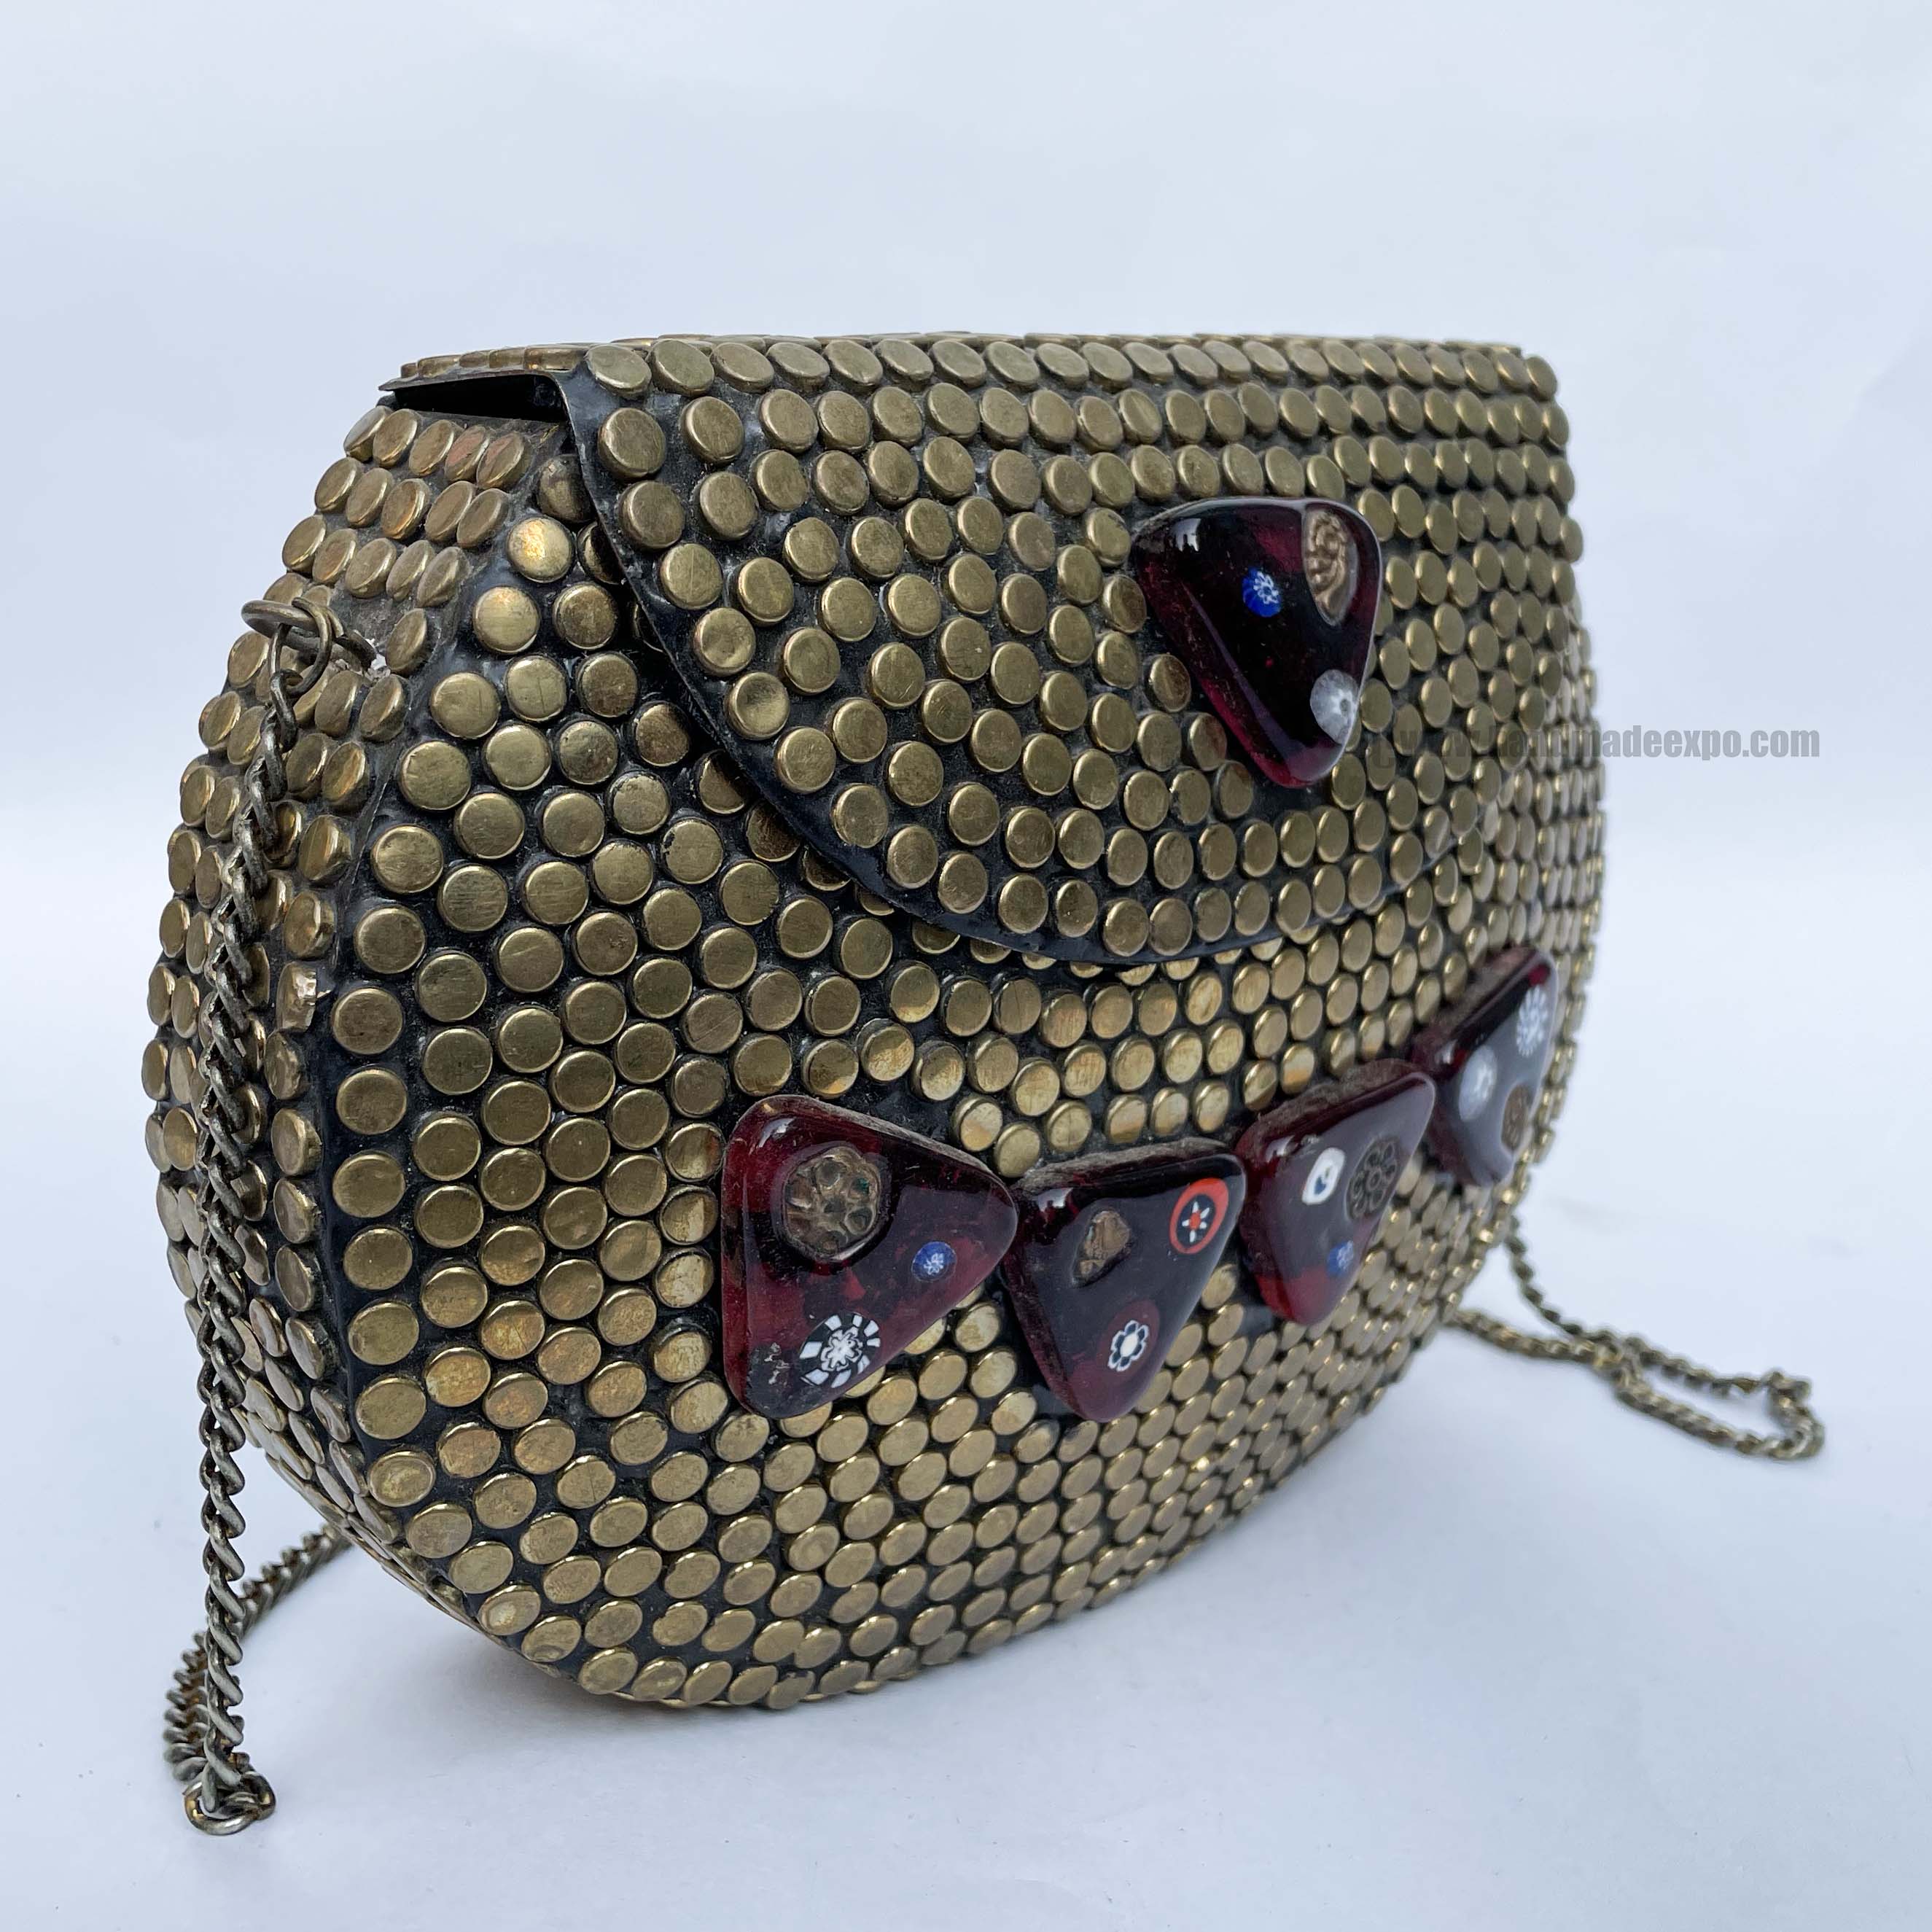 Nepali Handmade Big Ladies Bag With stone Setting, metal, golden And Black Color